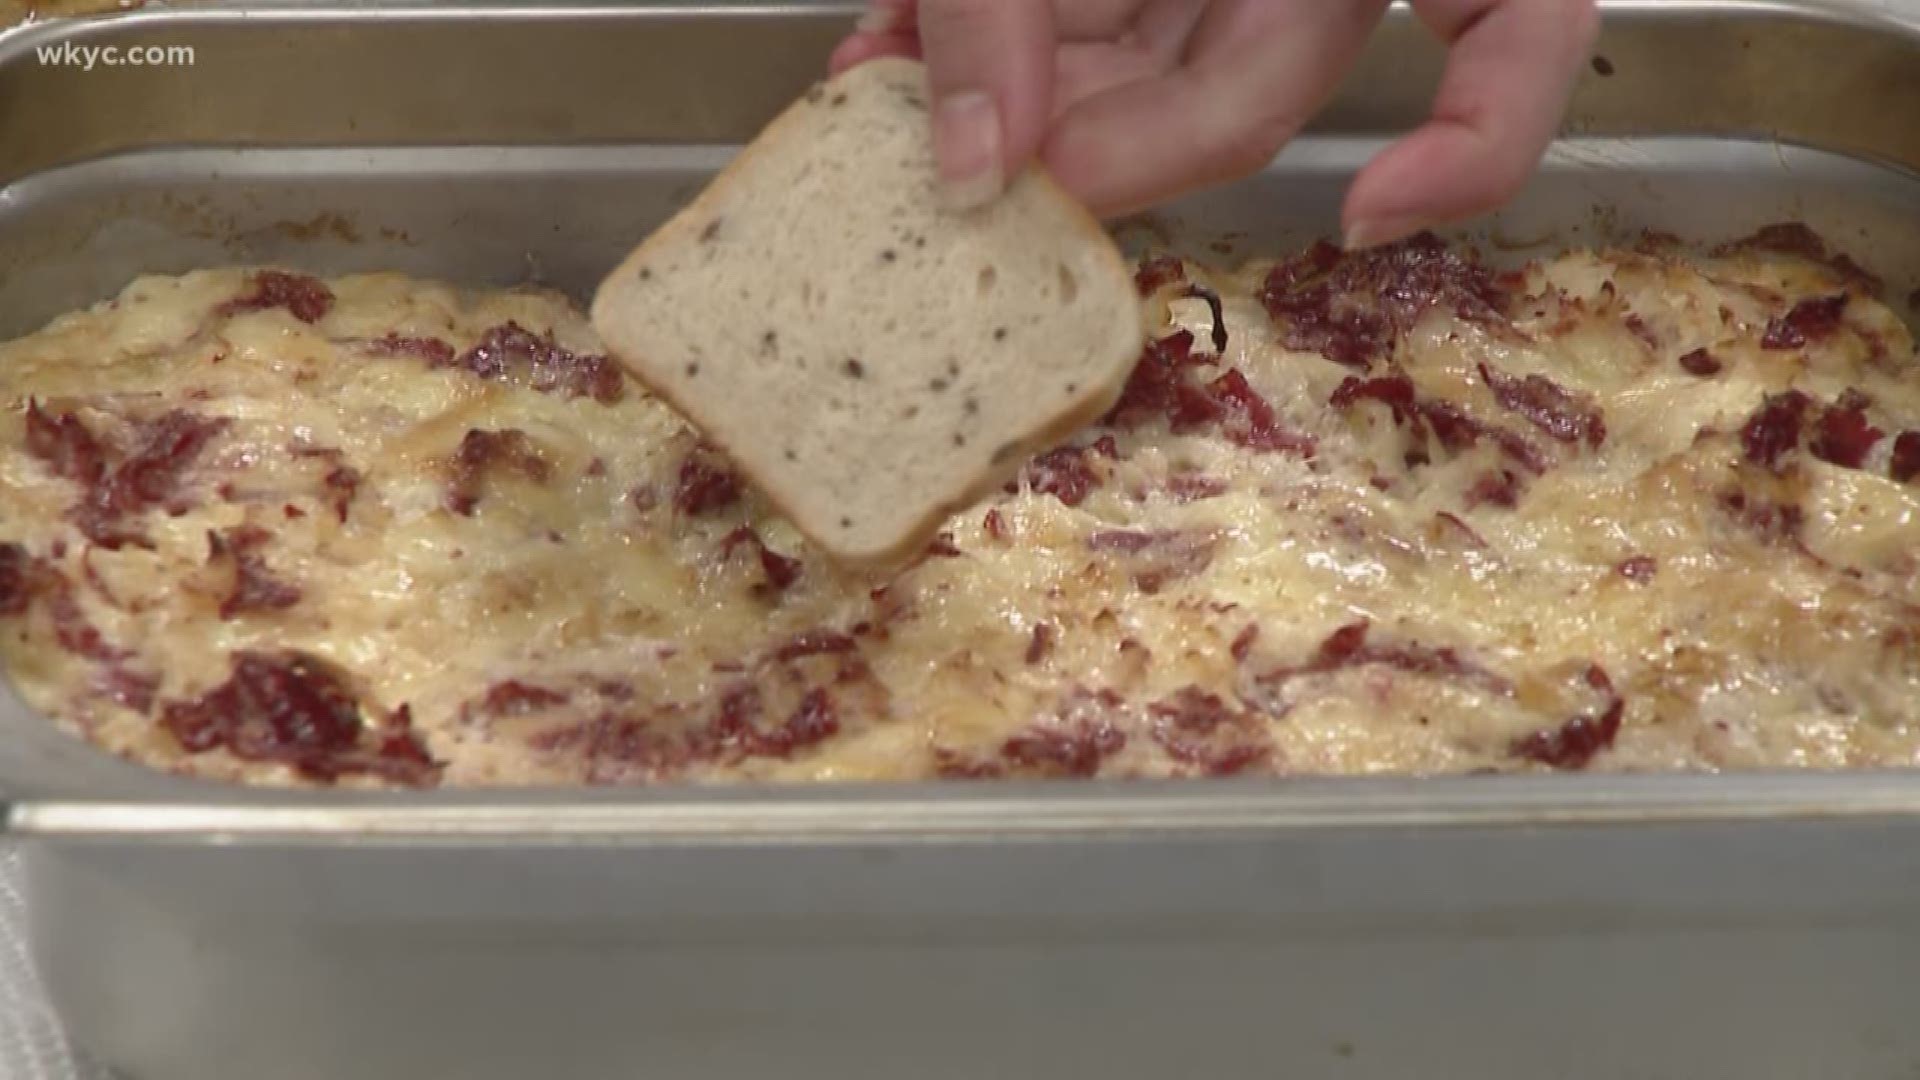 Feb. 1, 2019: This viewer-submitted Super Bowl recipe came in from Karen. It's a simple reuben dip that will change your game day viewing party.